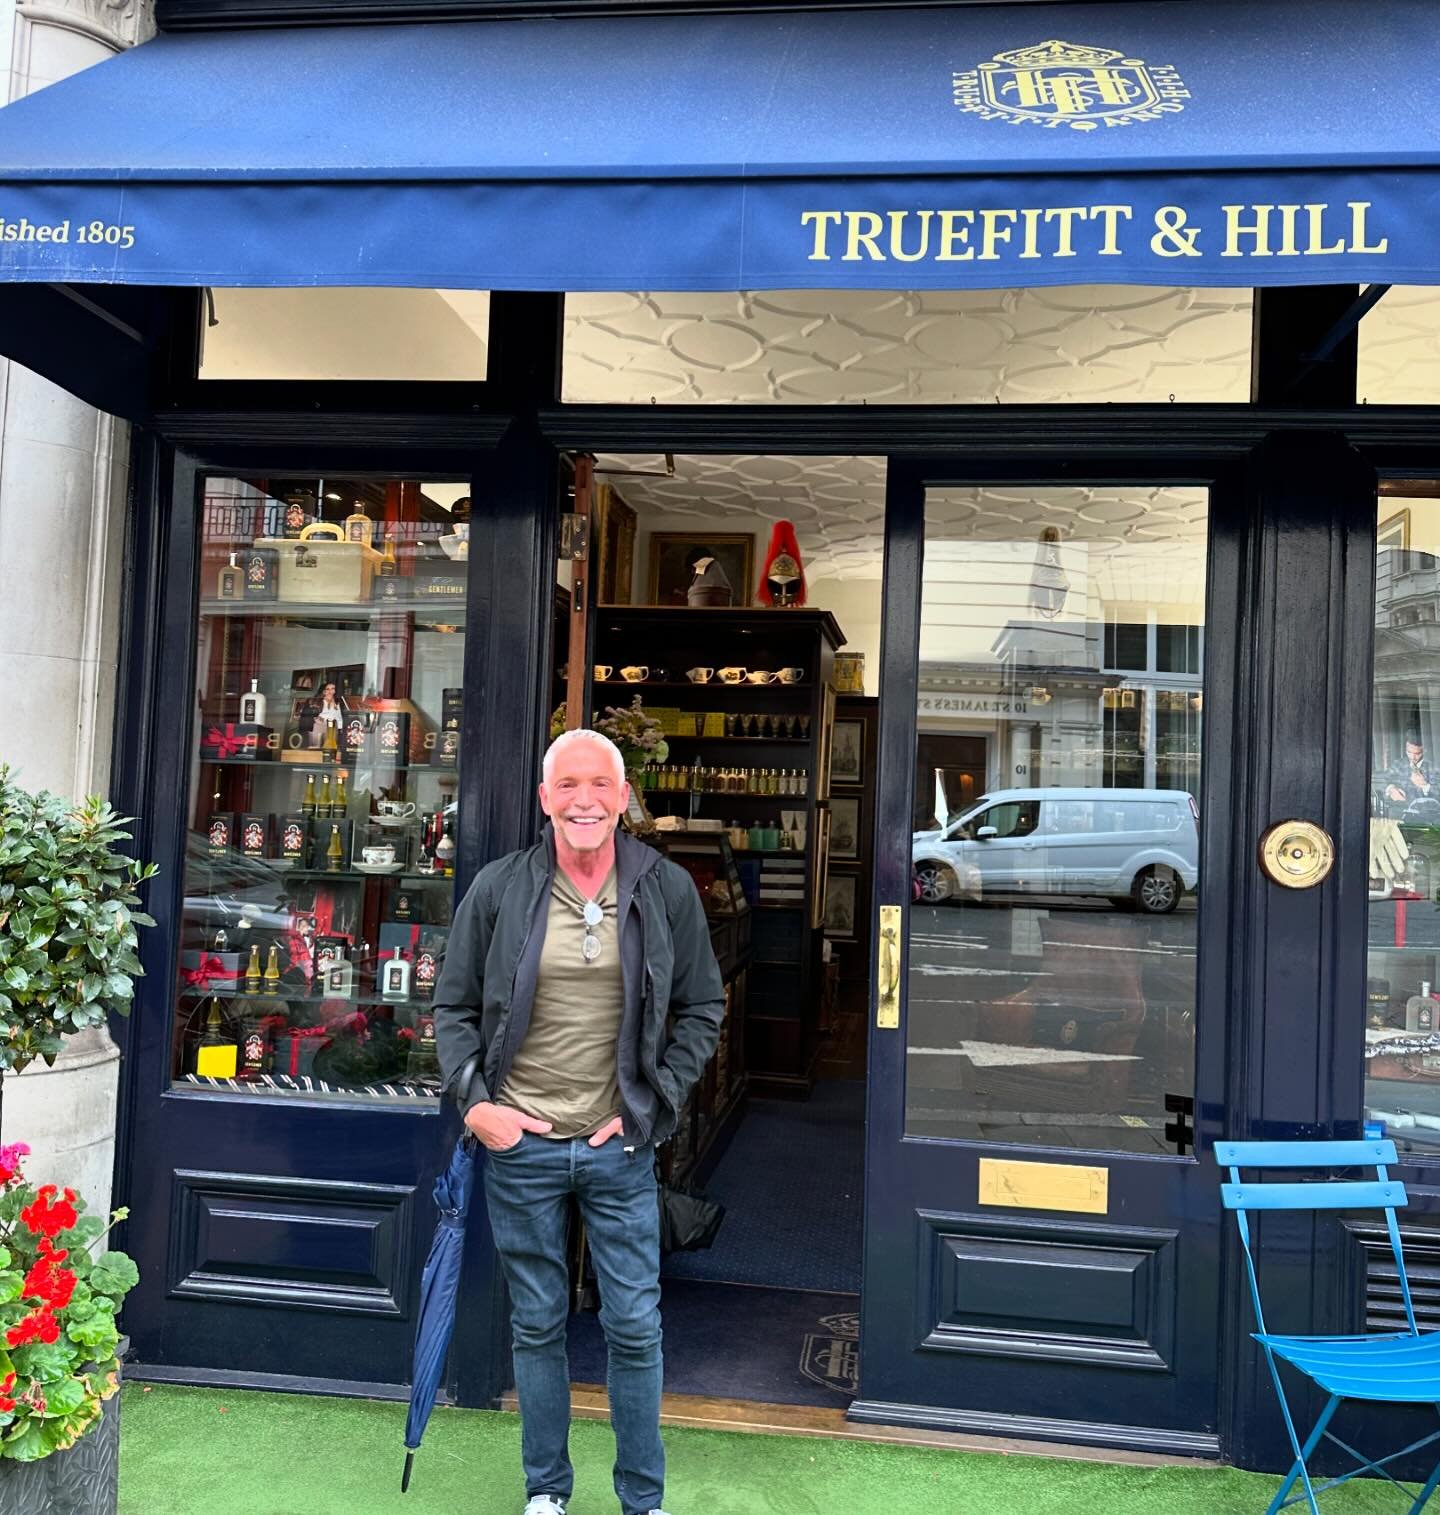 Much needed haircut today in London at the oldest barber shop in the world, @truefittandhillofficial &mdash;where royalty has gone to get their hair cut for generations. Thanks Michael for a great cut, even for a non-royal like me! :)